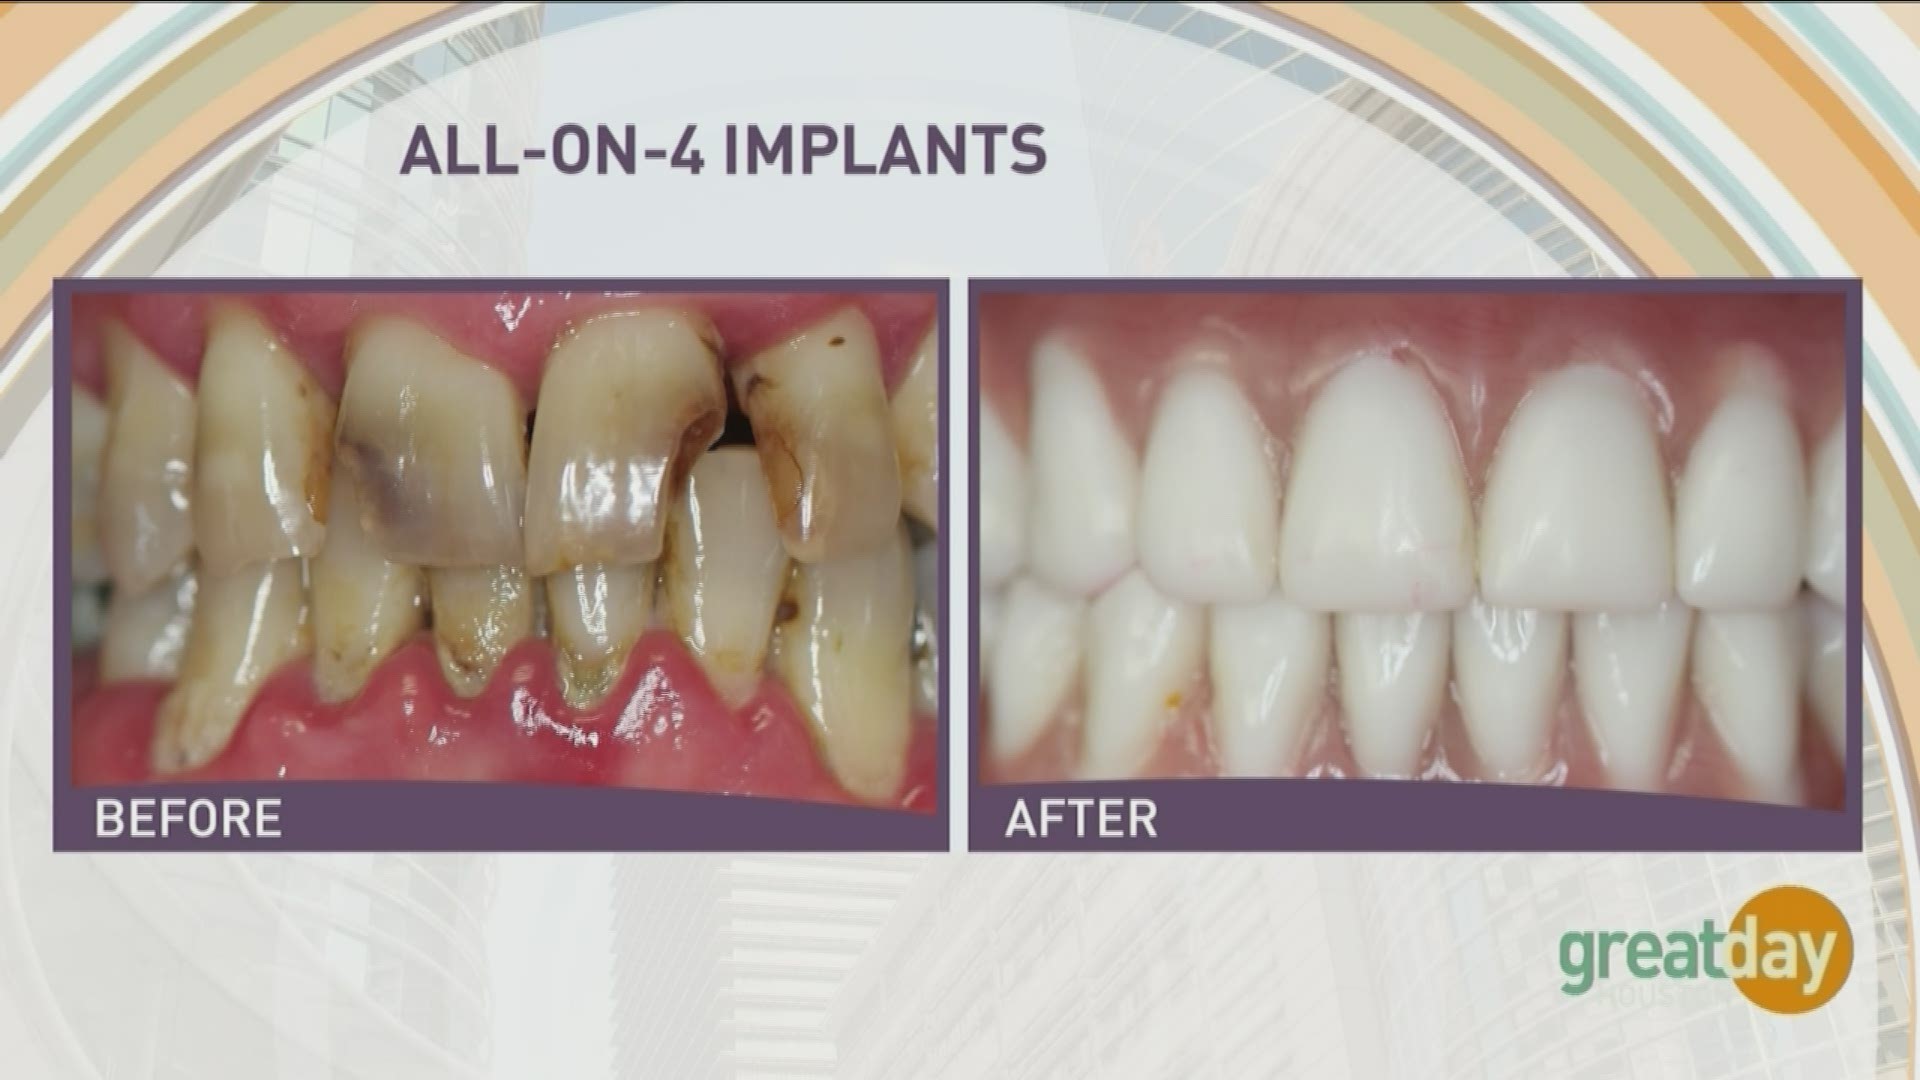 Periodontist Dr. Raouf Hanna has placed over 20,000 dental implants and wants to make you smile again.